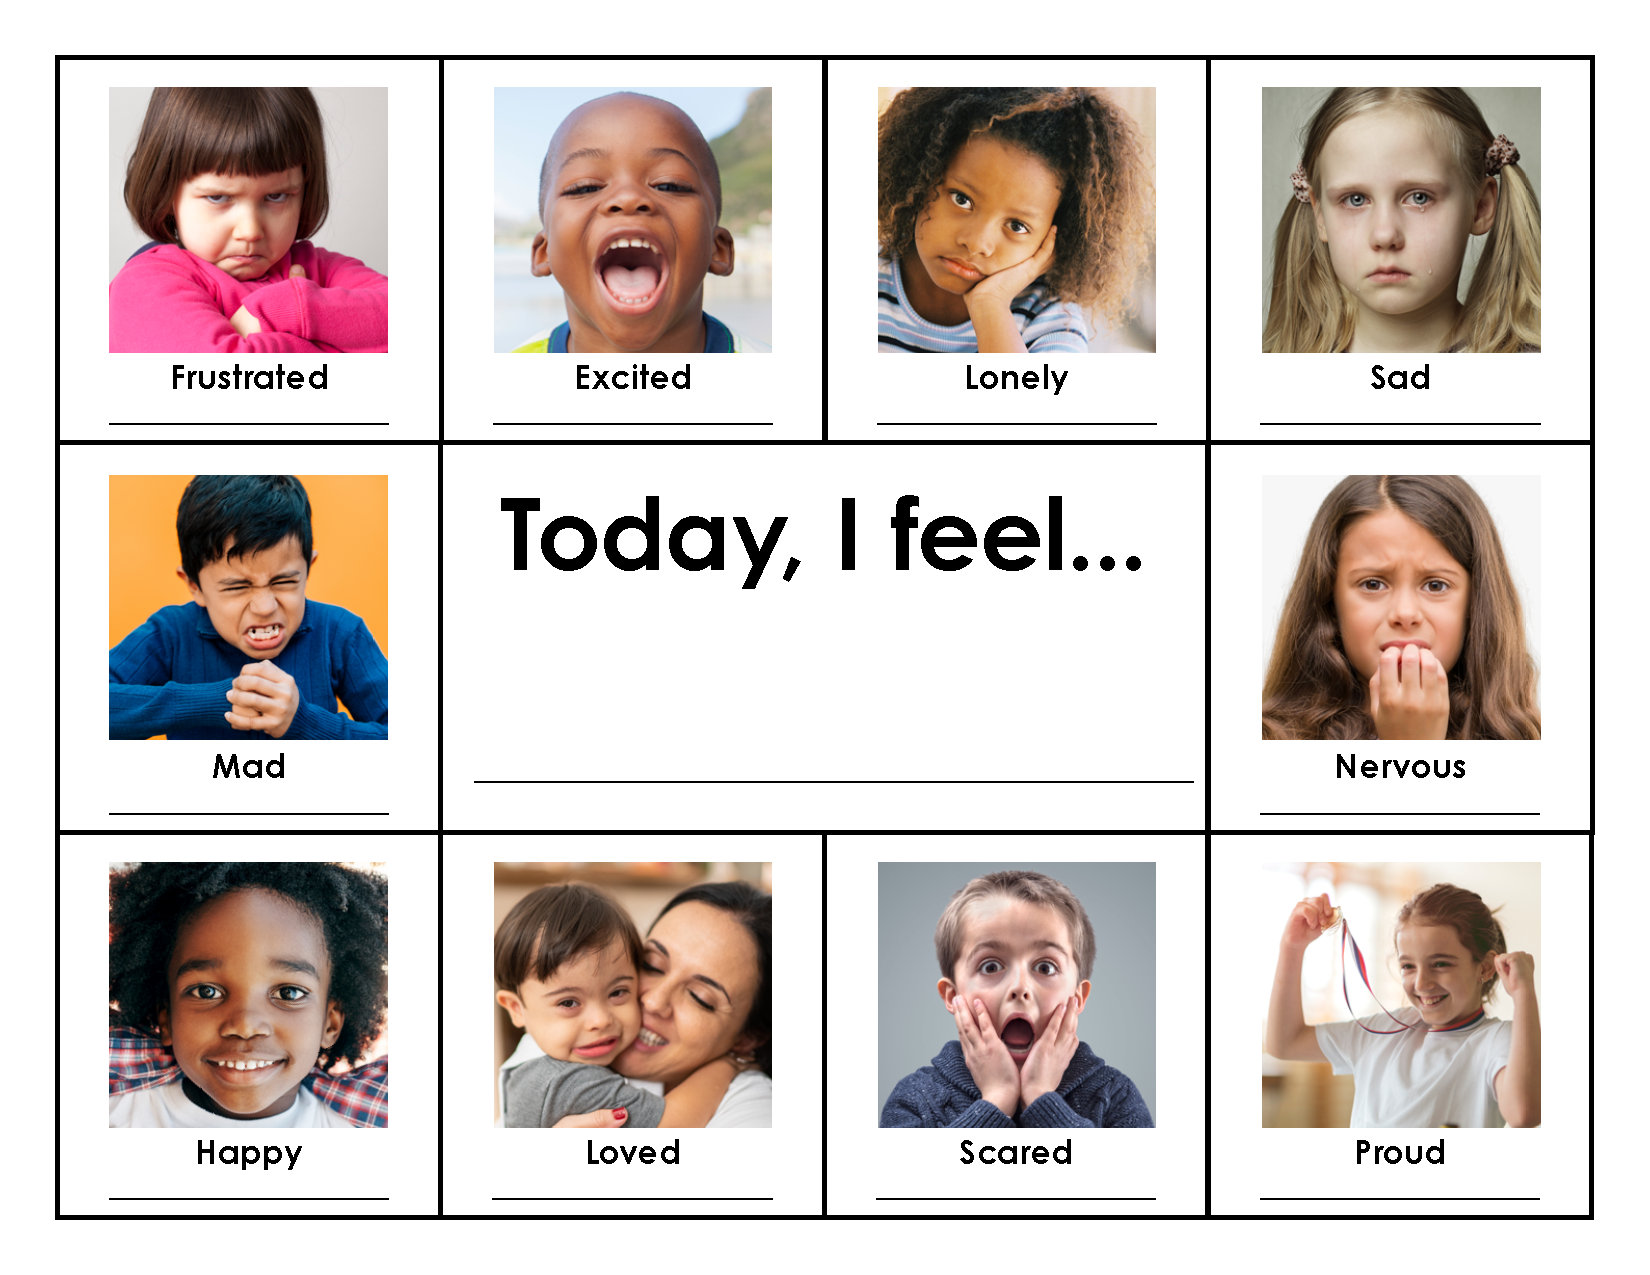 feelings faces charts children